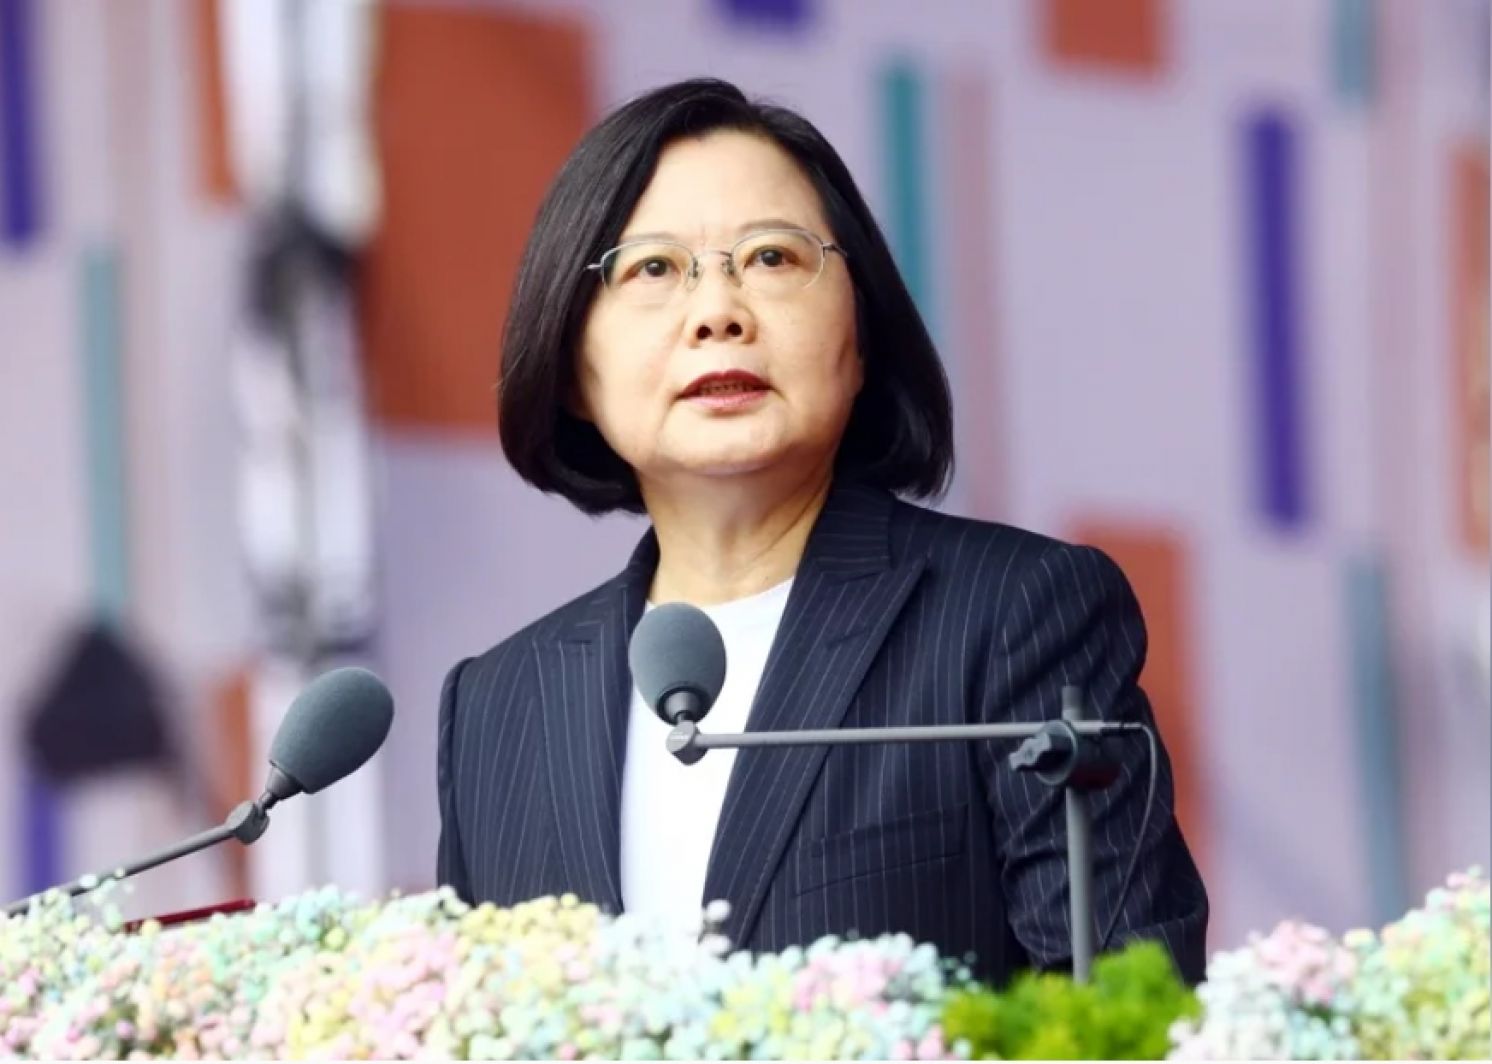 President Tsai: Open to Dialogue with Beijing Based on Respect and Understanding